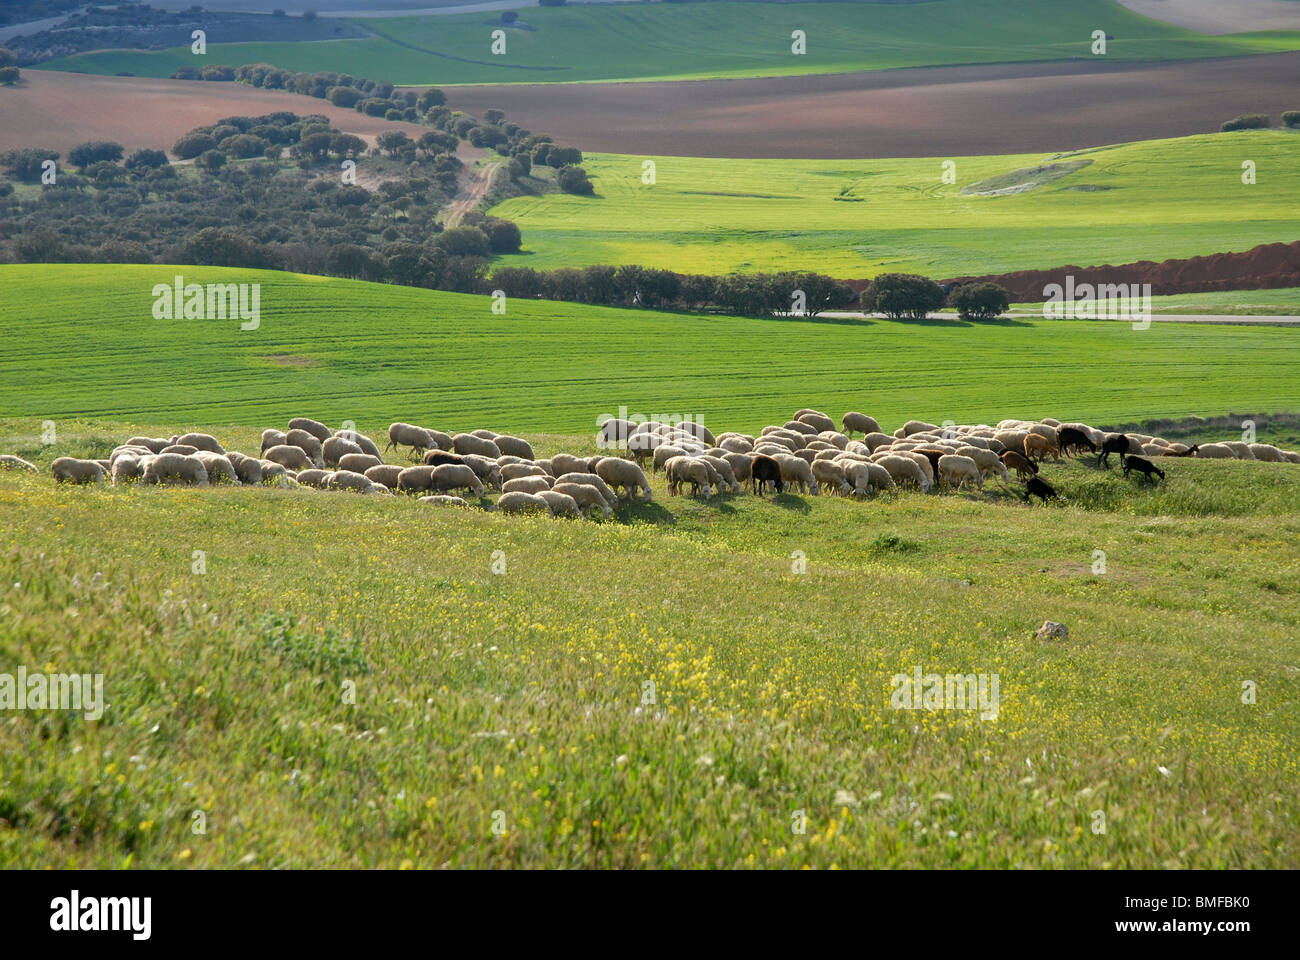 view with sheep and goats, from Roman ruins of Segobriga, near Saelices, Cuenca Province, Castile-La Mancha, Spain Stock Photo